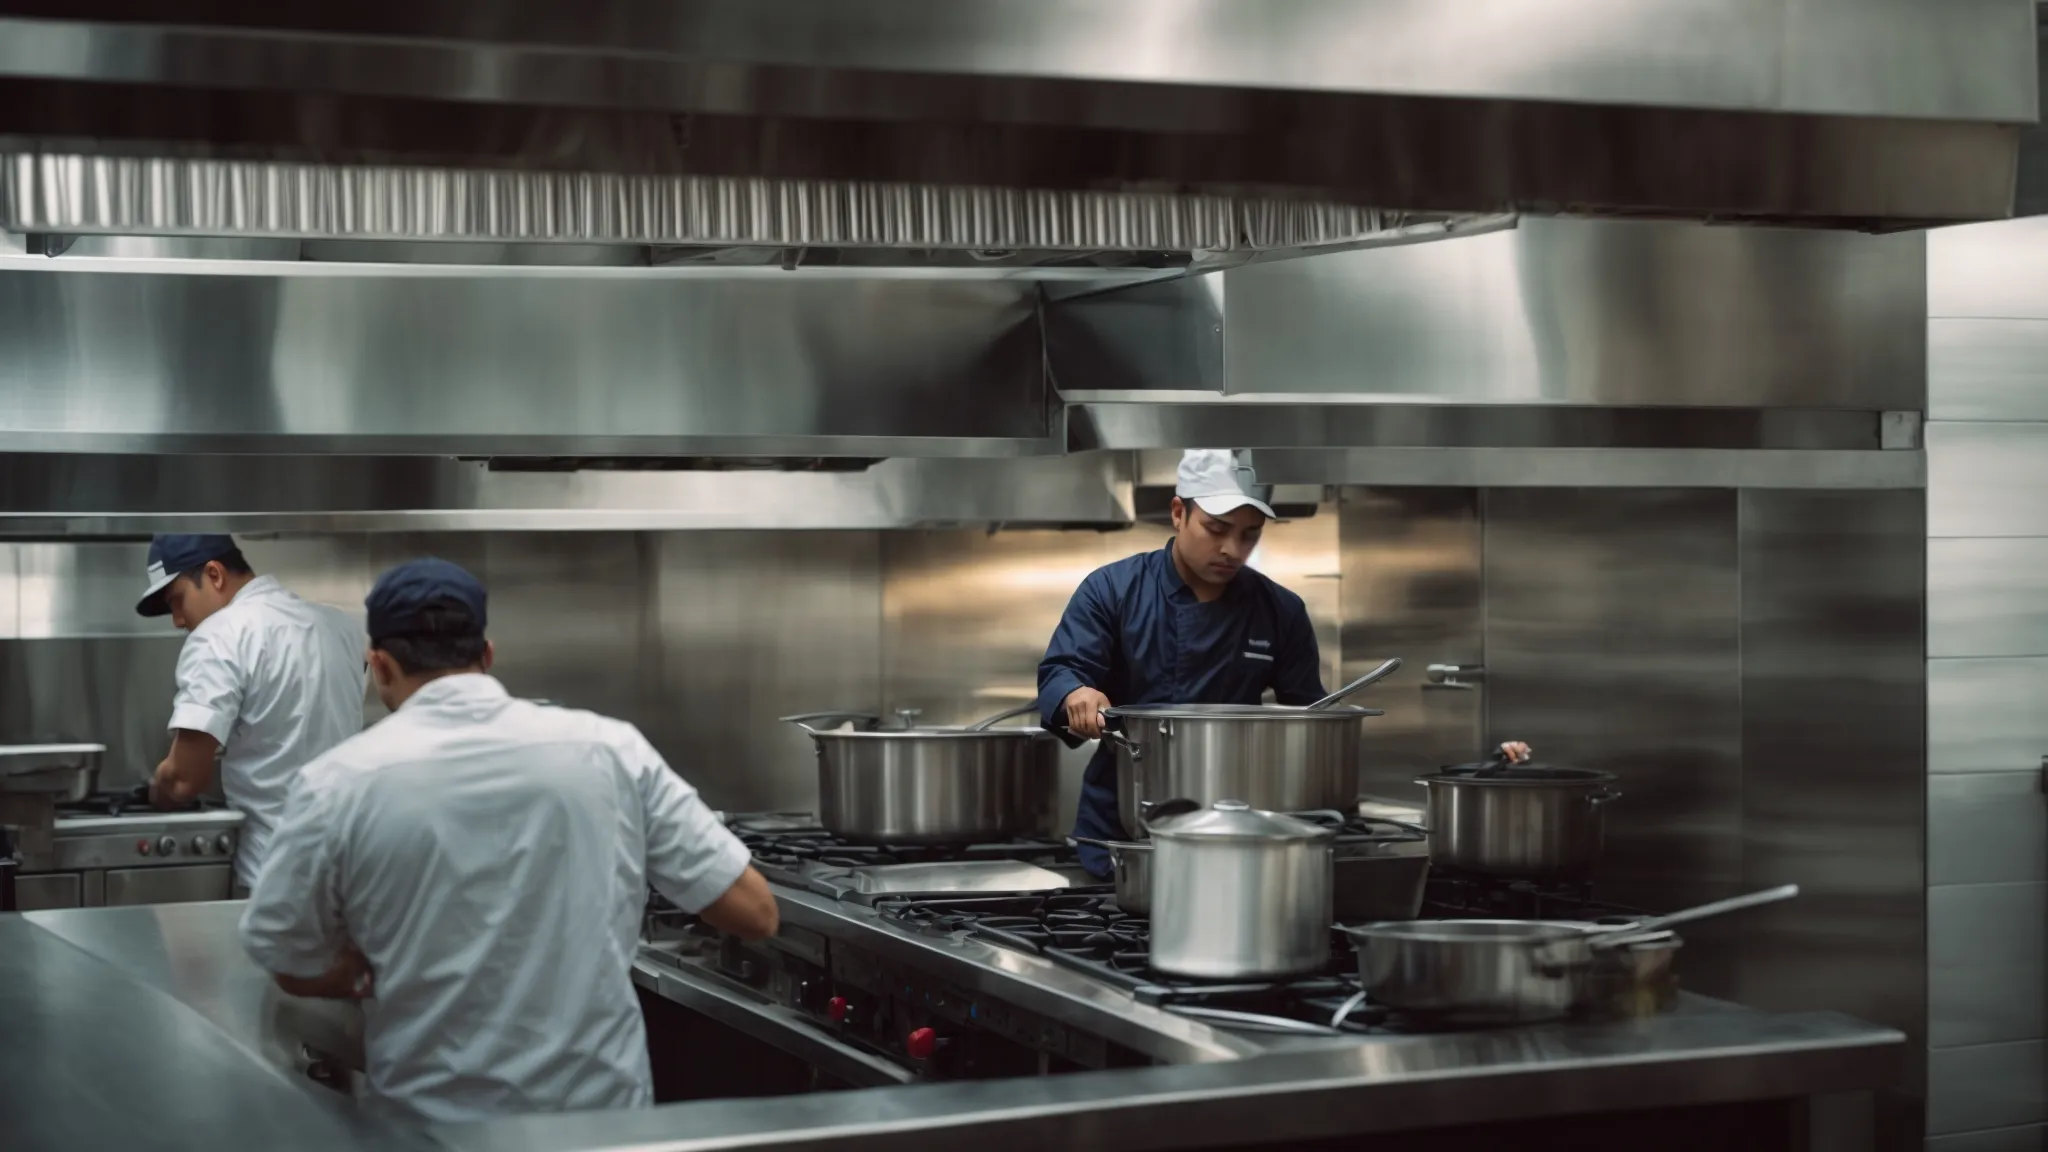 a professional diligently cleans a commercial kitchen hood, ensuring a safe and hazard-free cooking environment.